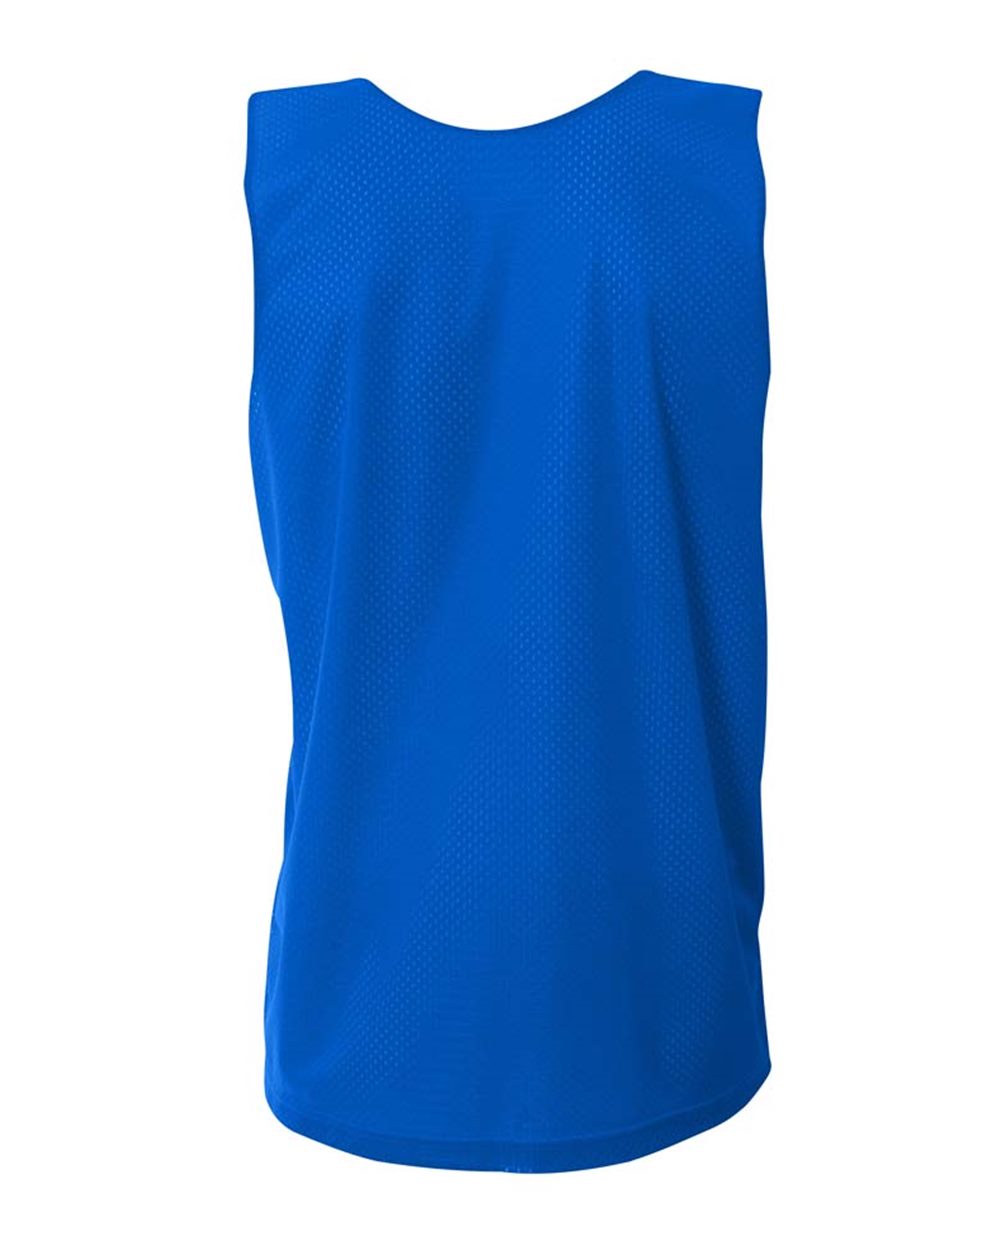 A4254 - Youth Reversible Mesh Tank - One Stop